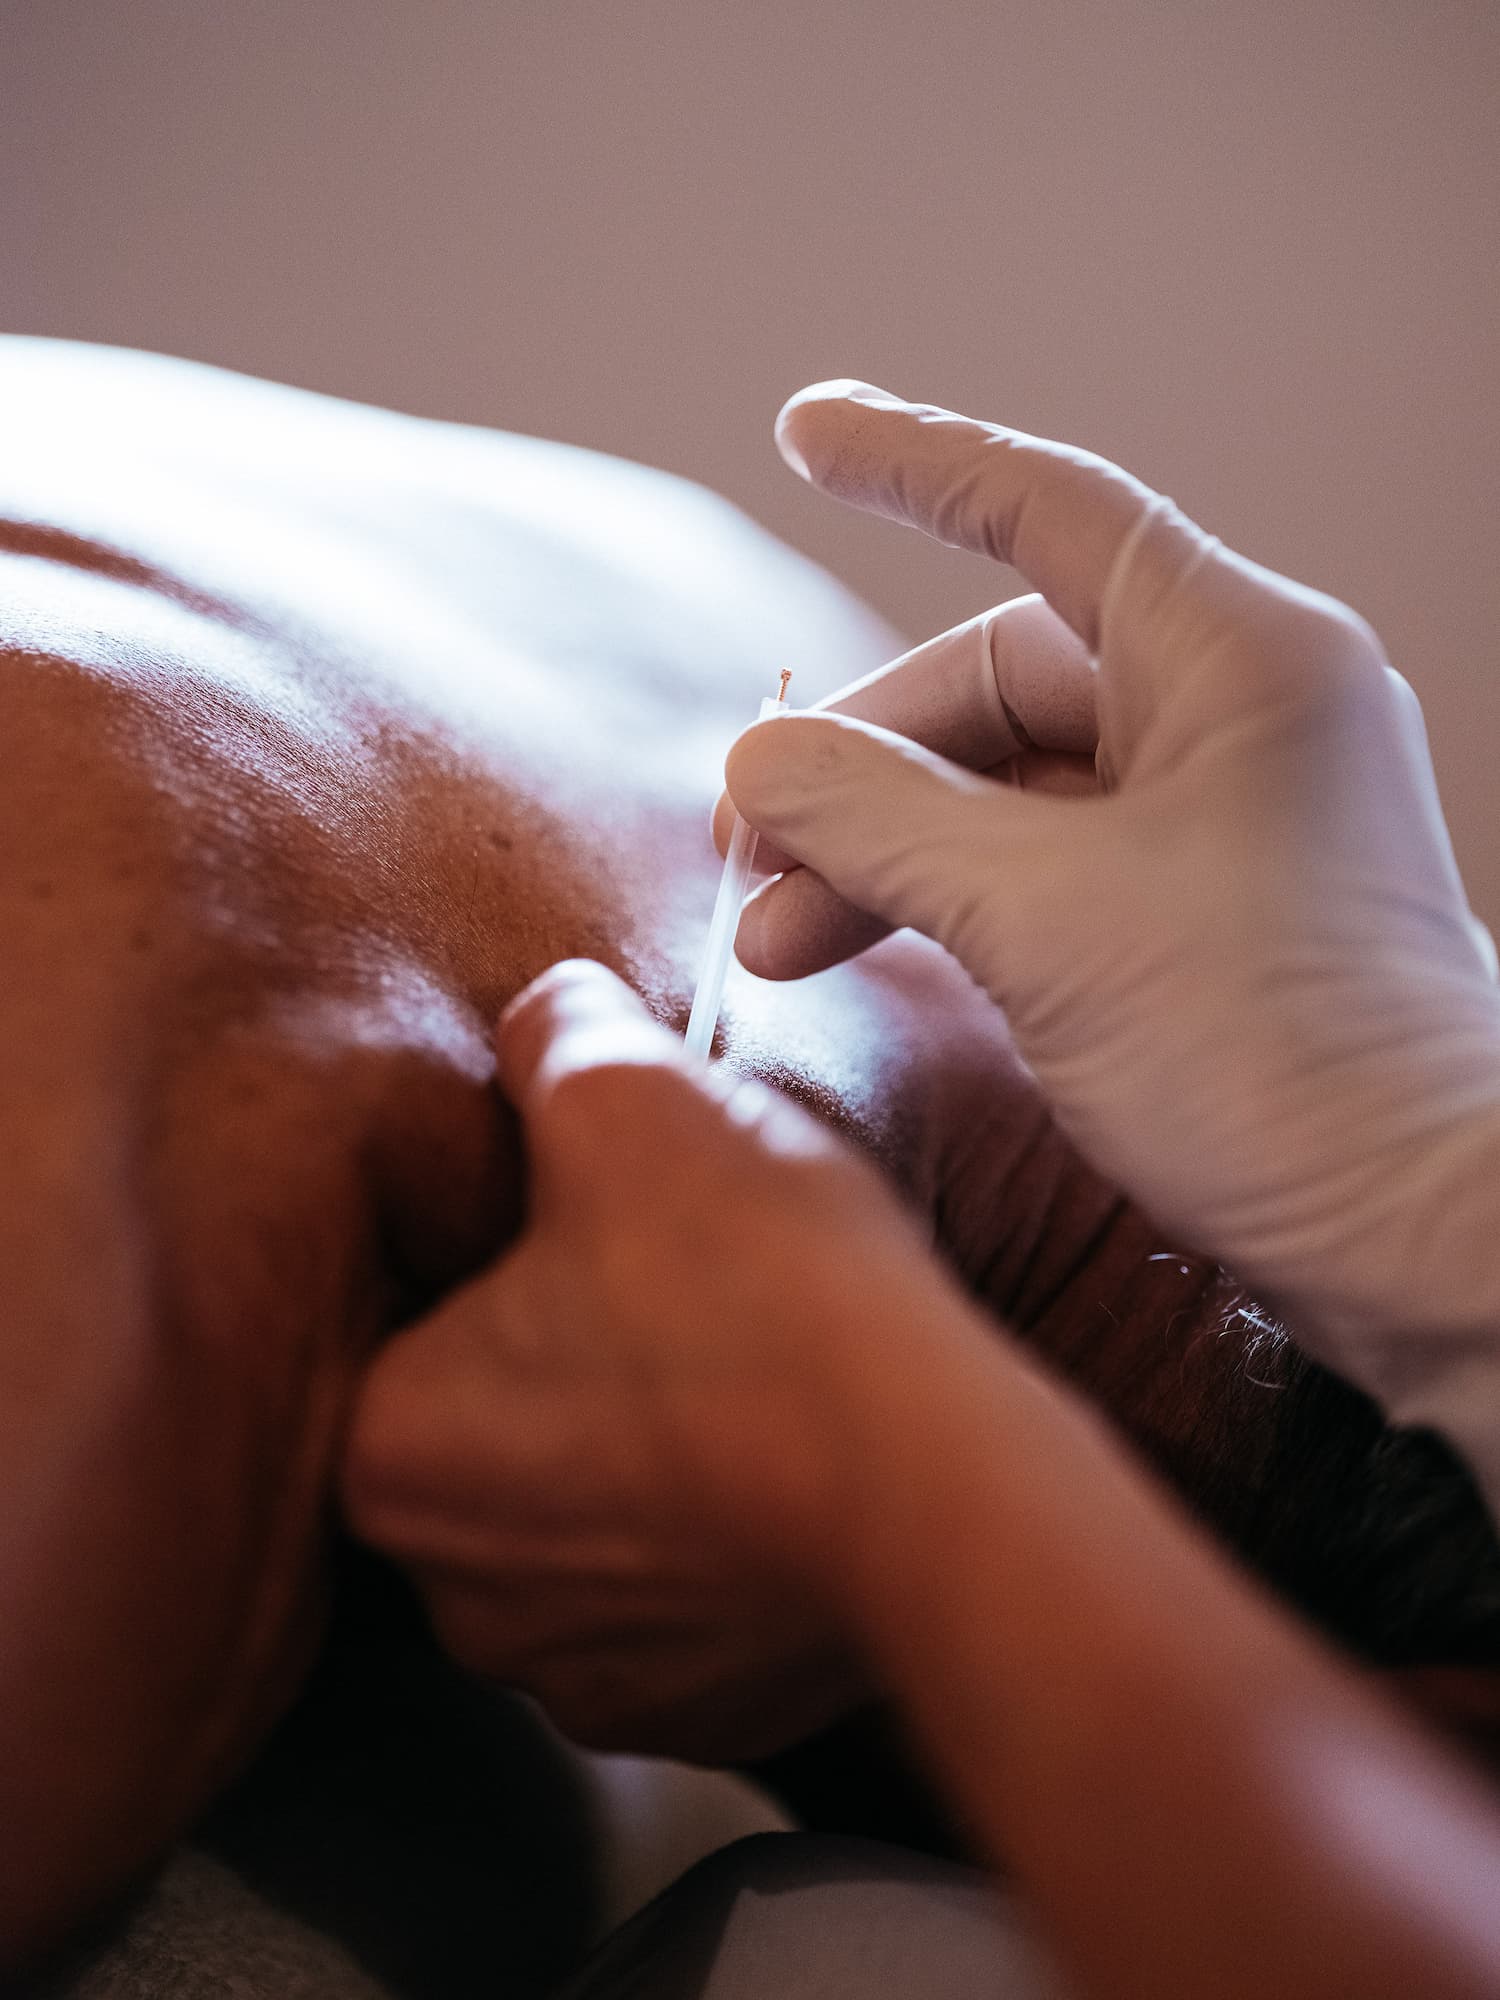 A theraputic needle being applied to the pinched skin of a man's shoulder.